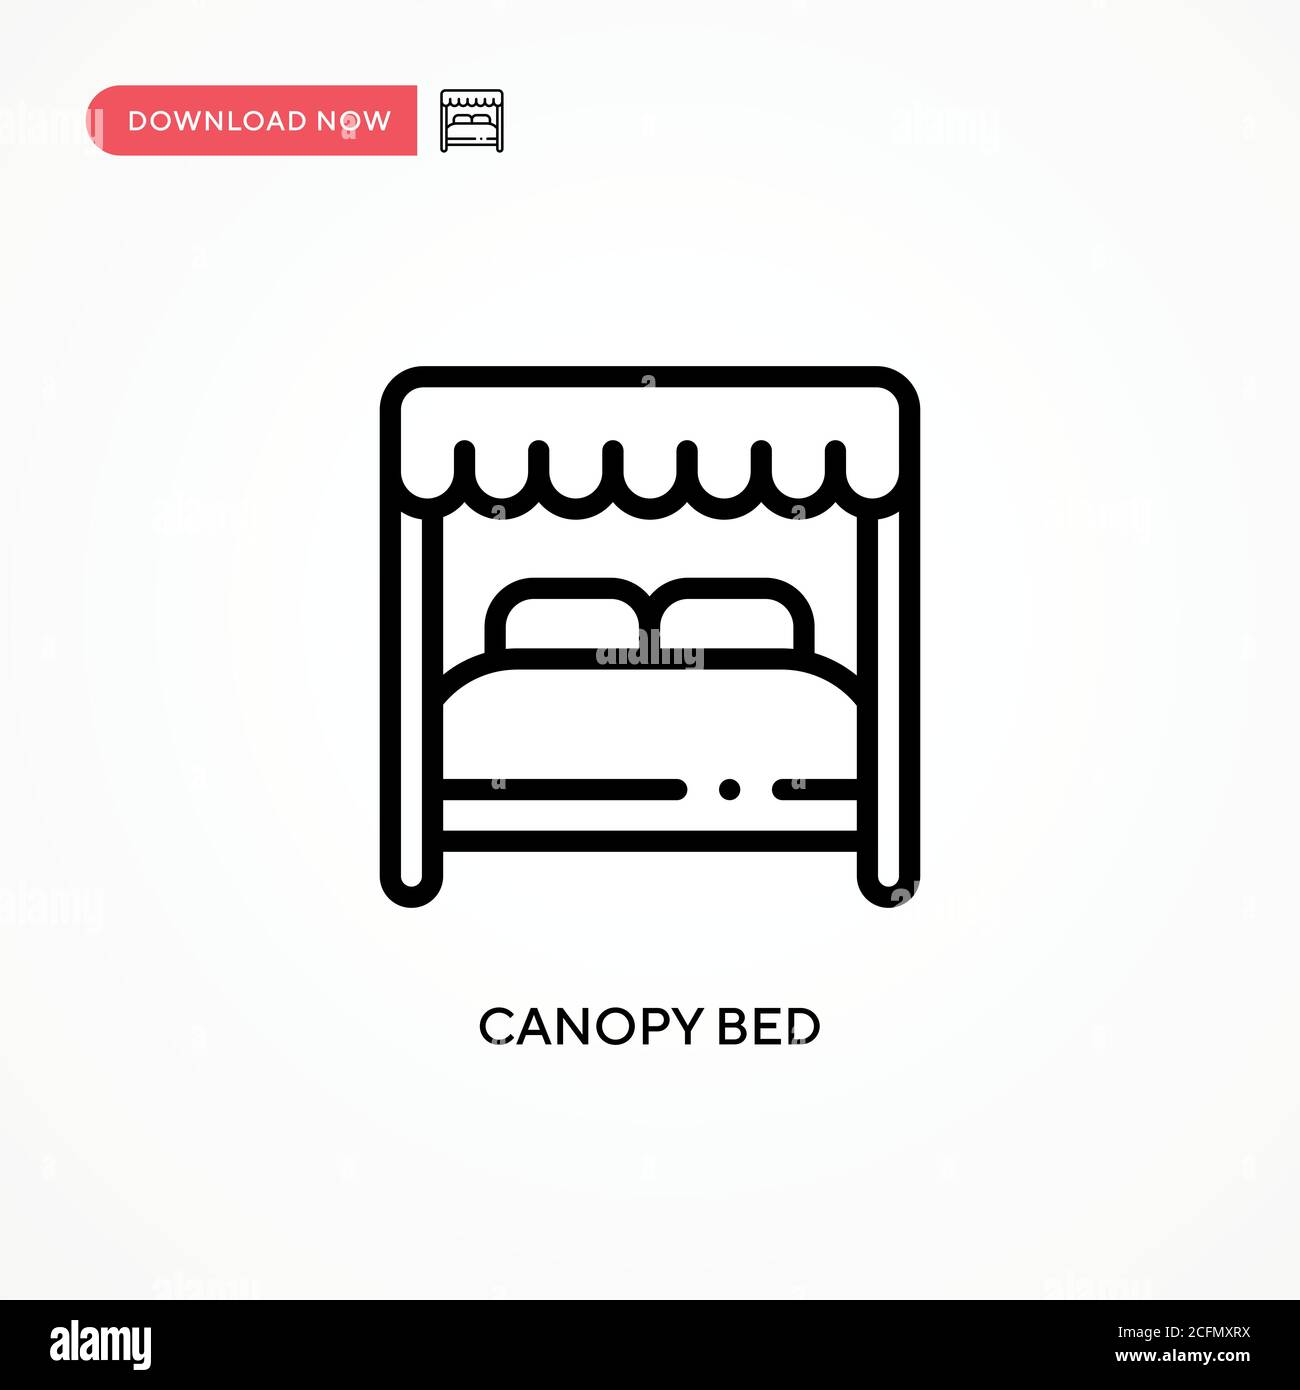 Canopy bed vector icon. Modern, simple flat vector illustration for web site or mobile app Stock Vector